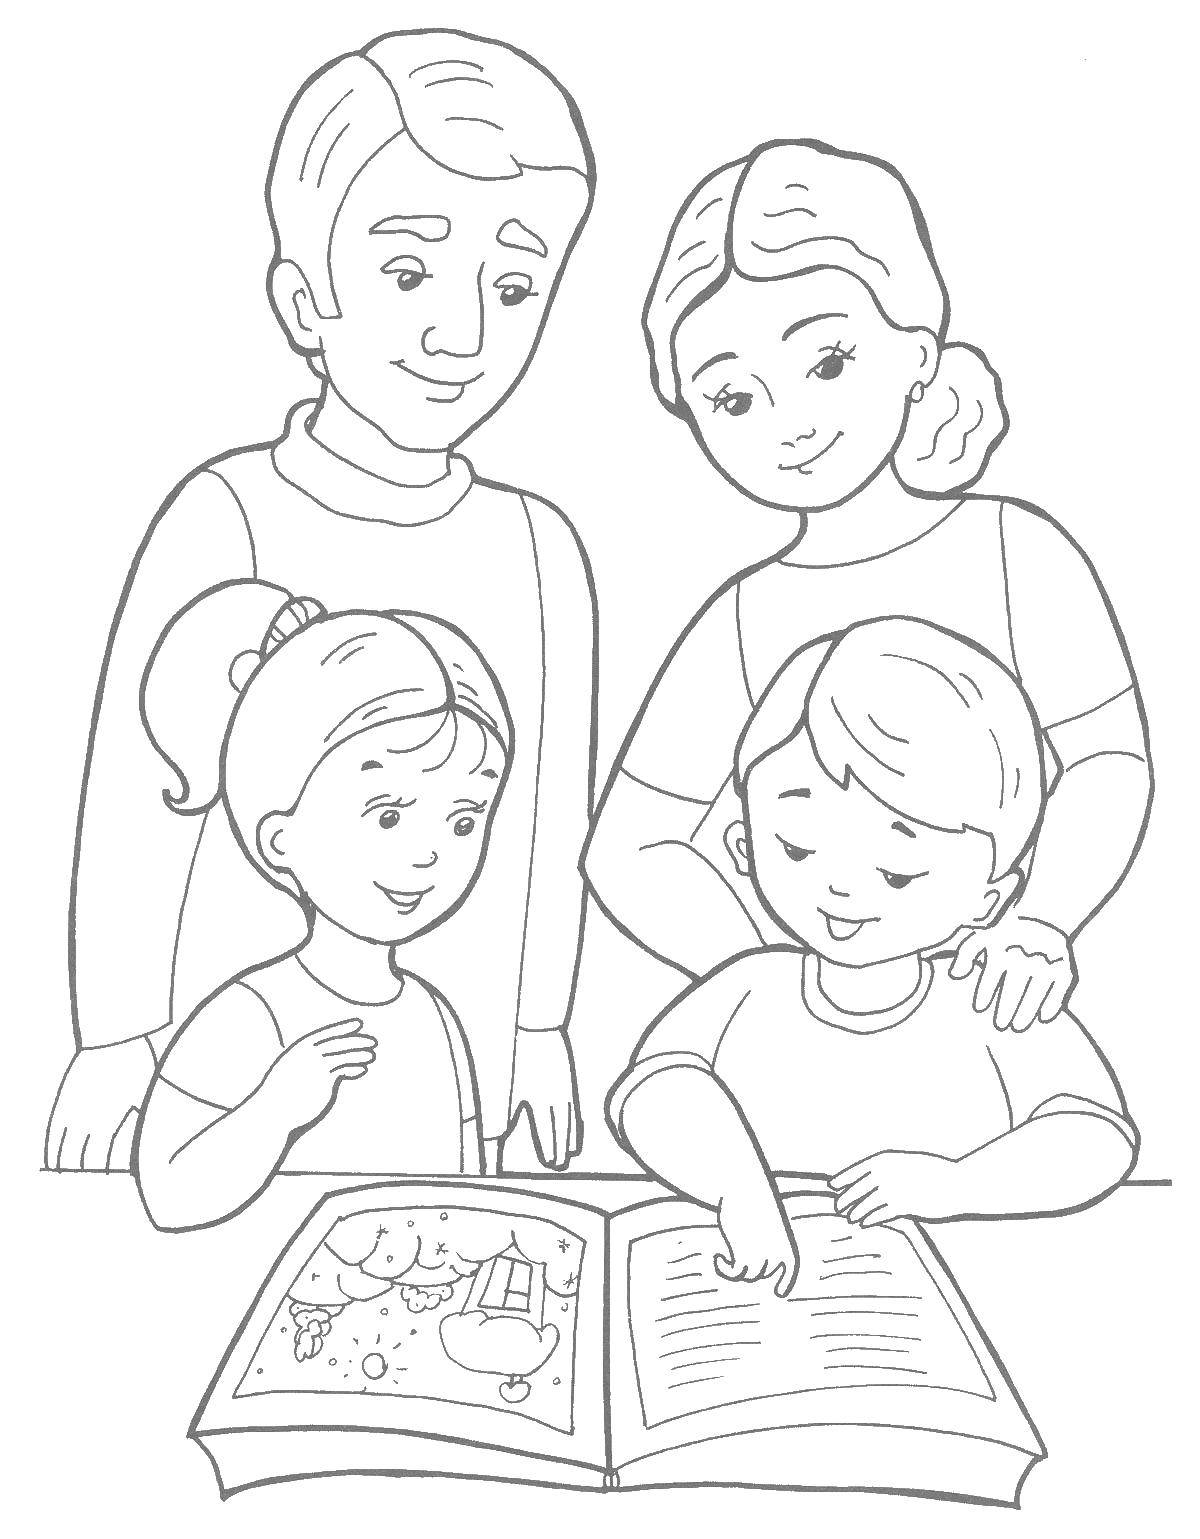 Coloring Family and book. Category family. Tags:  mom, dad, children, book.